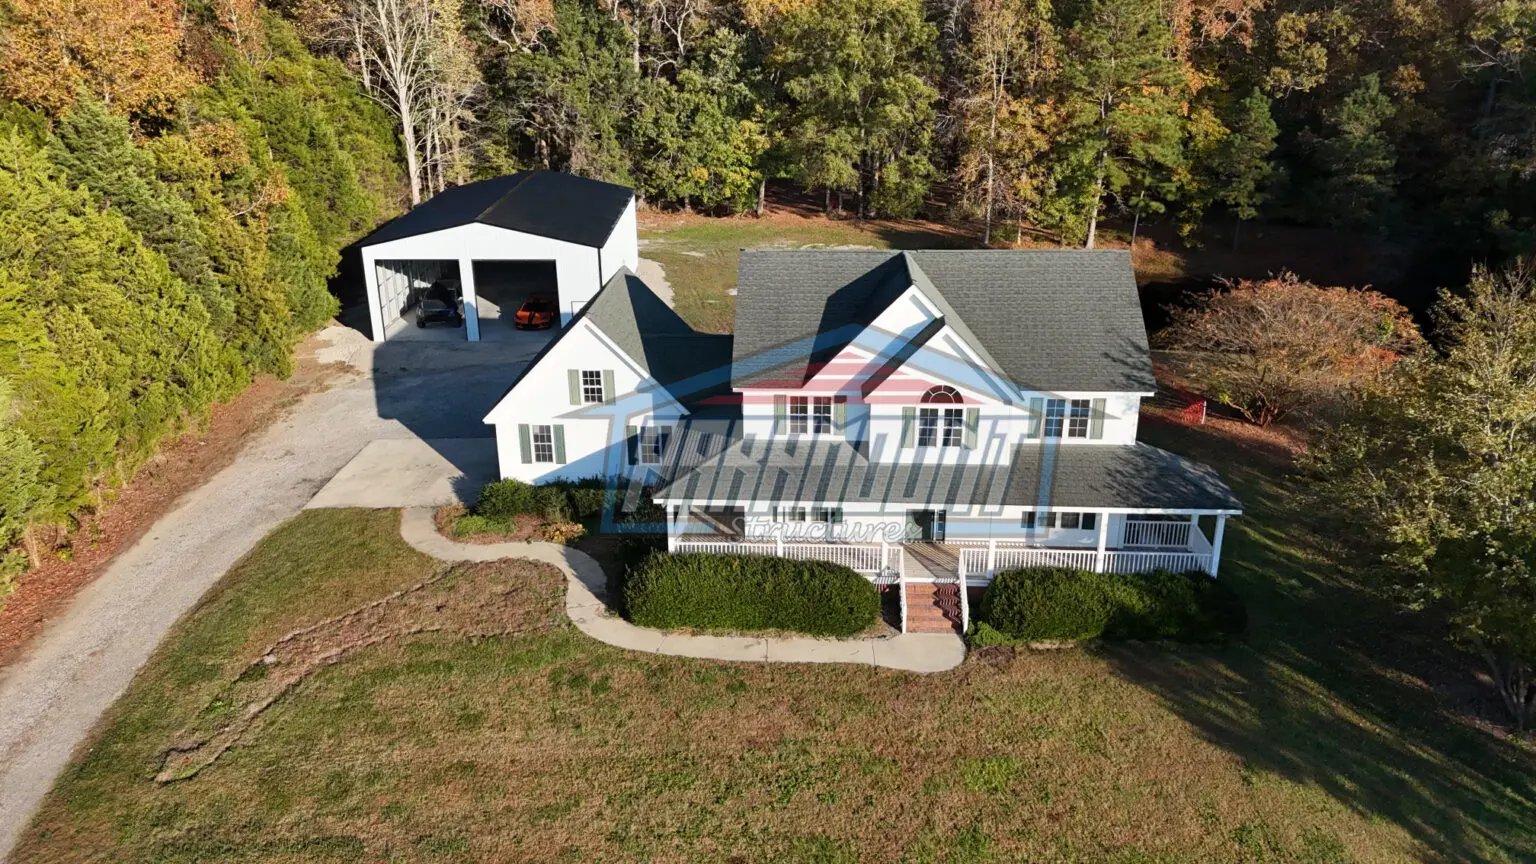 An aerial view of a home in the woods.